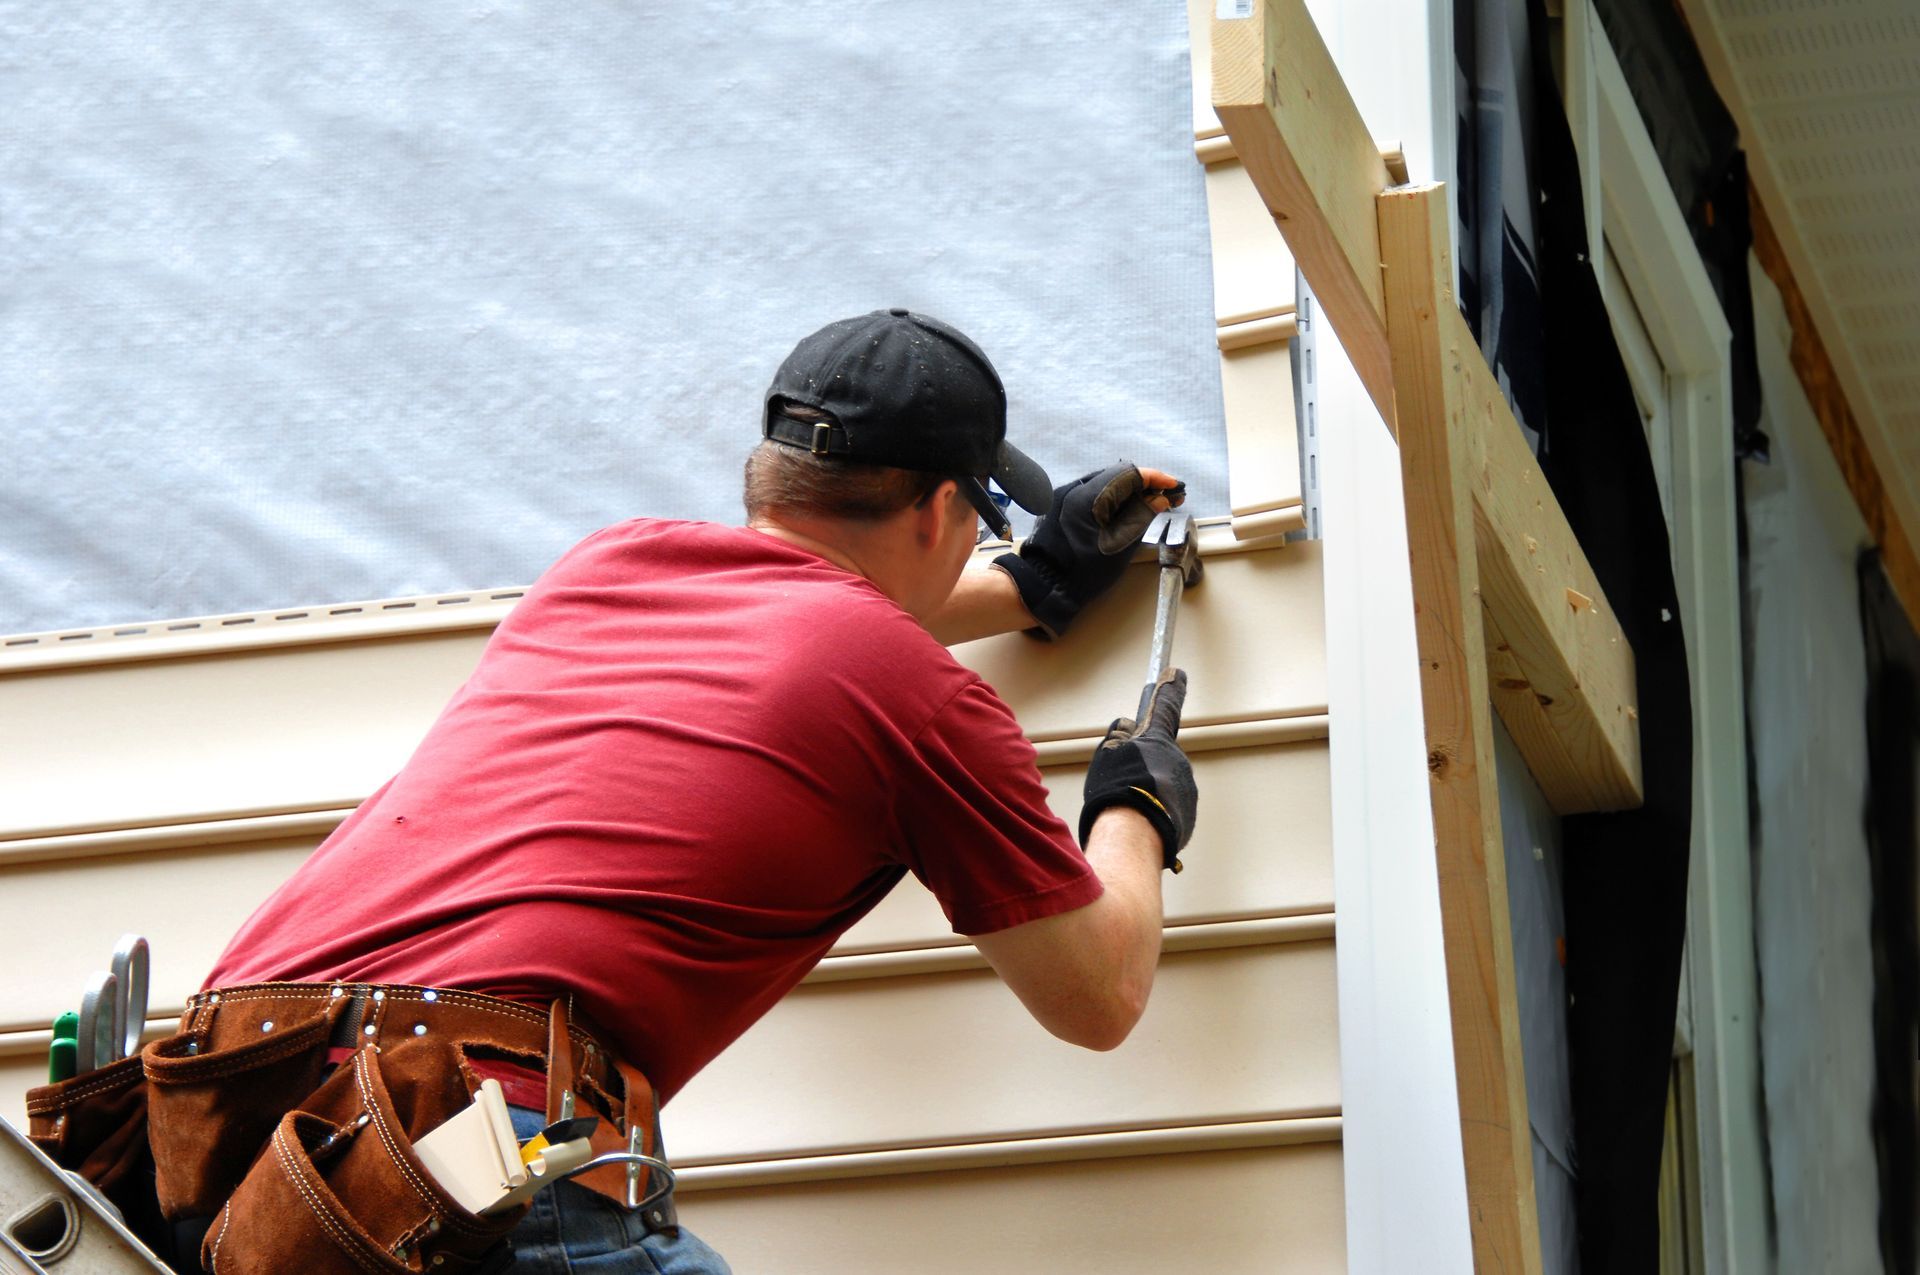 An experienced worker repairing damaged siding on a house, carefully removing the deteriorated sections and replacing them with new, sturdy siding boards.